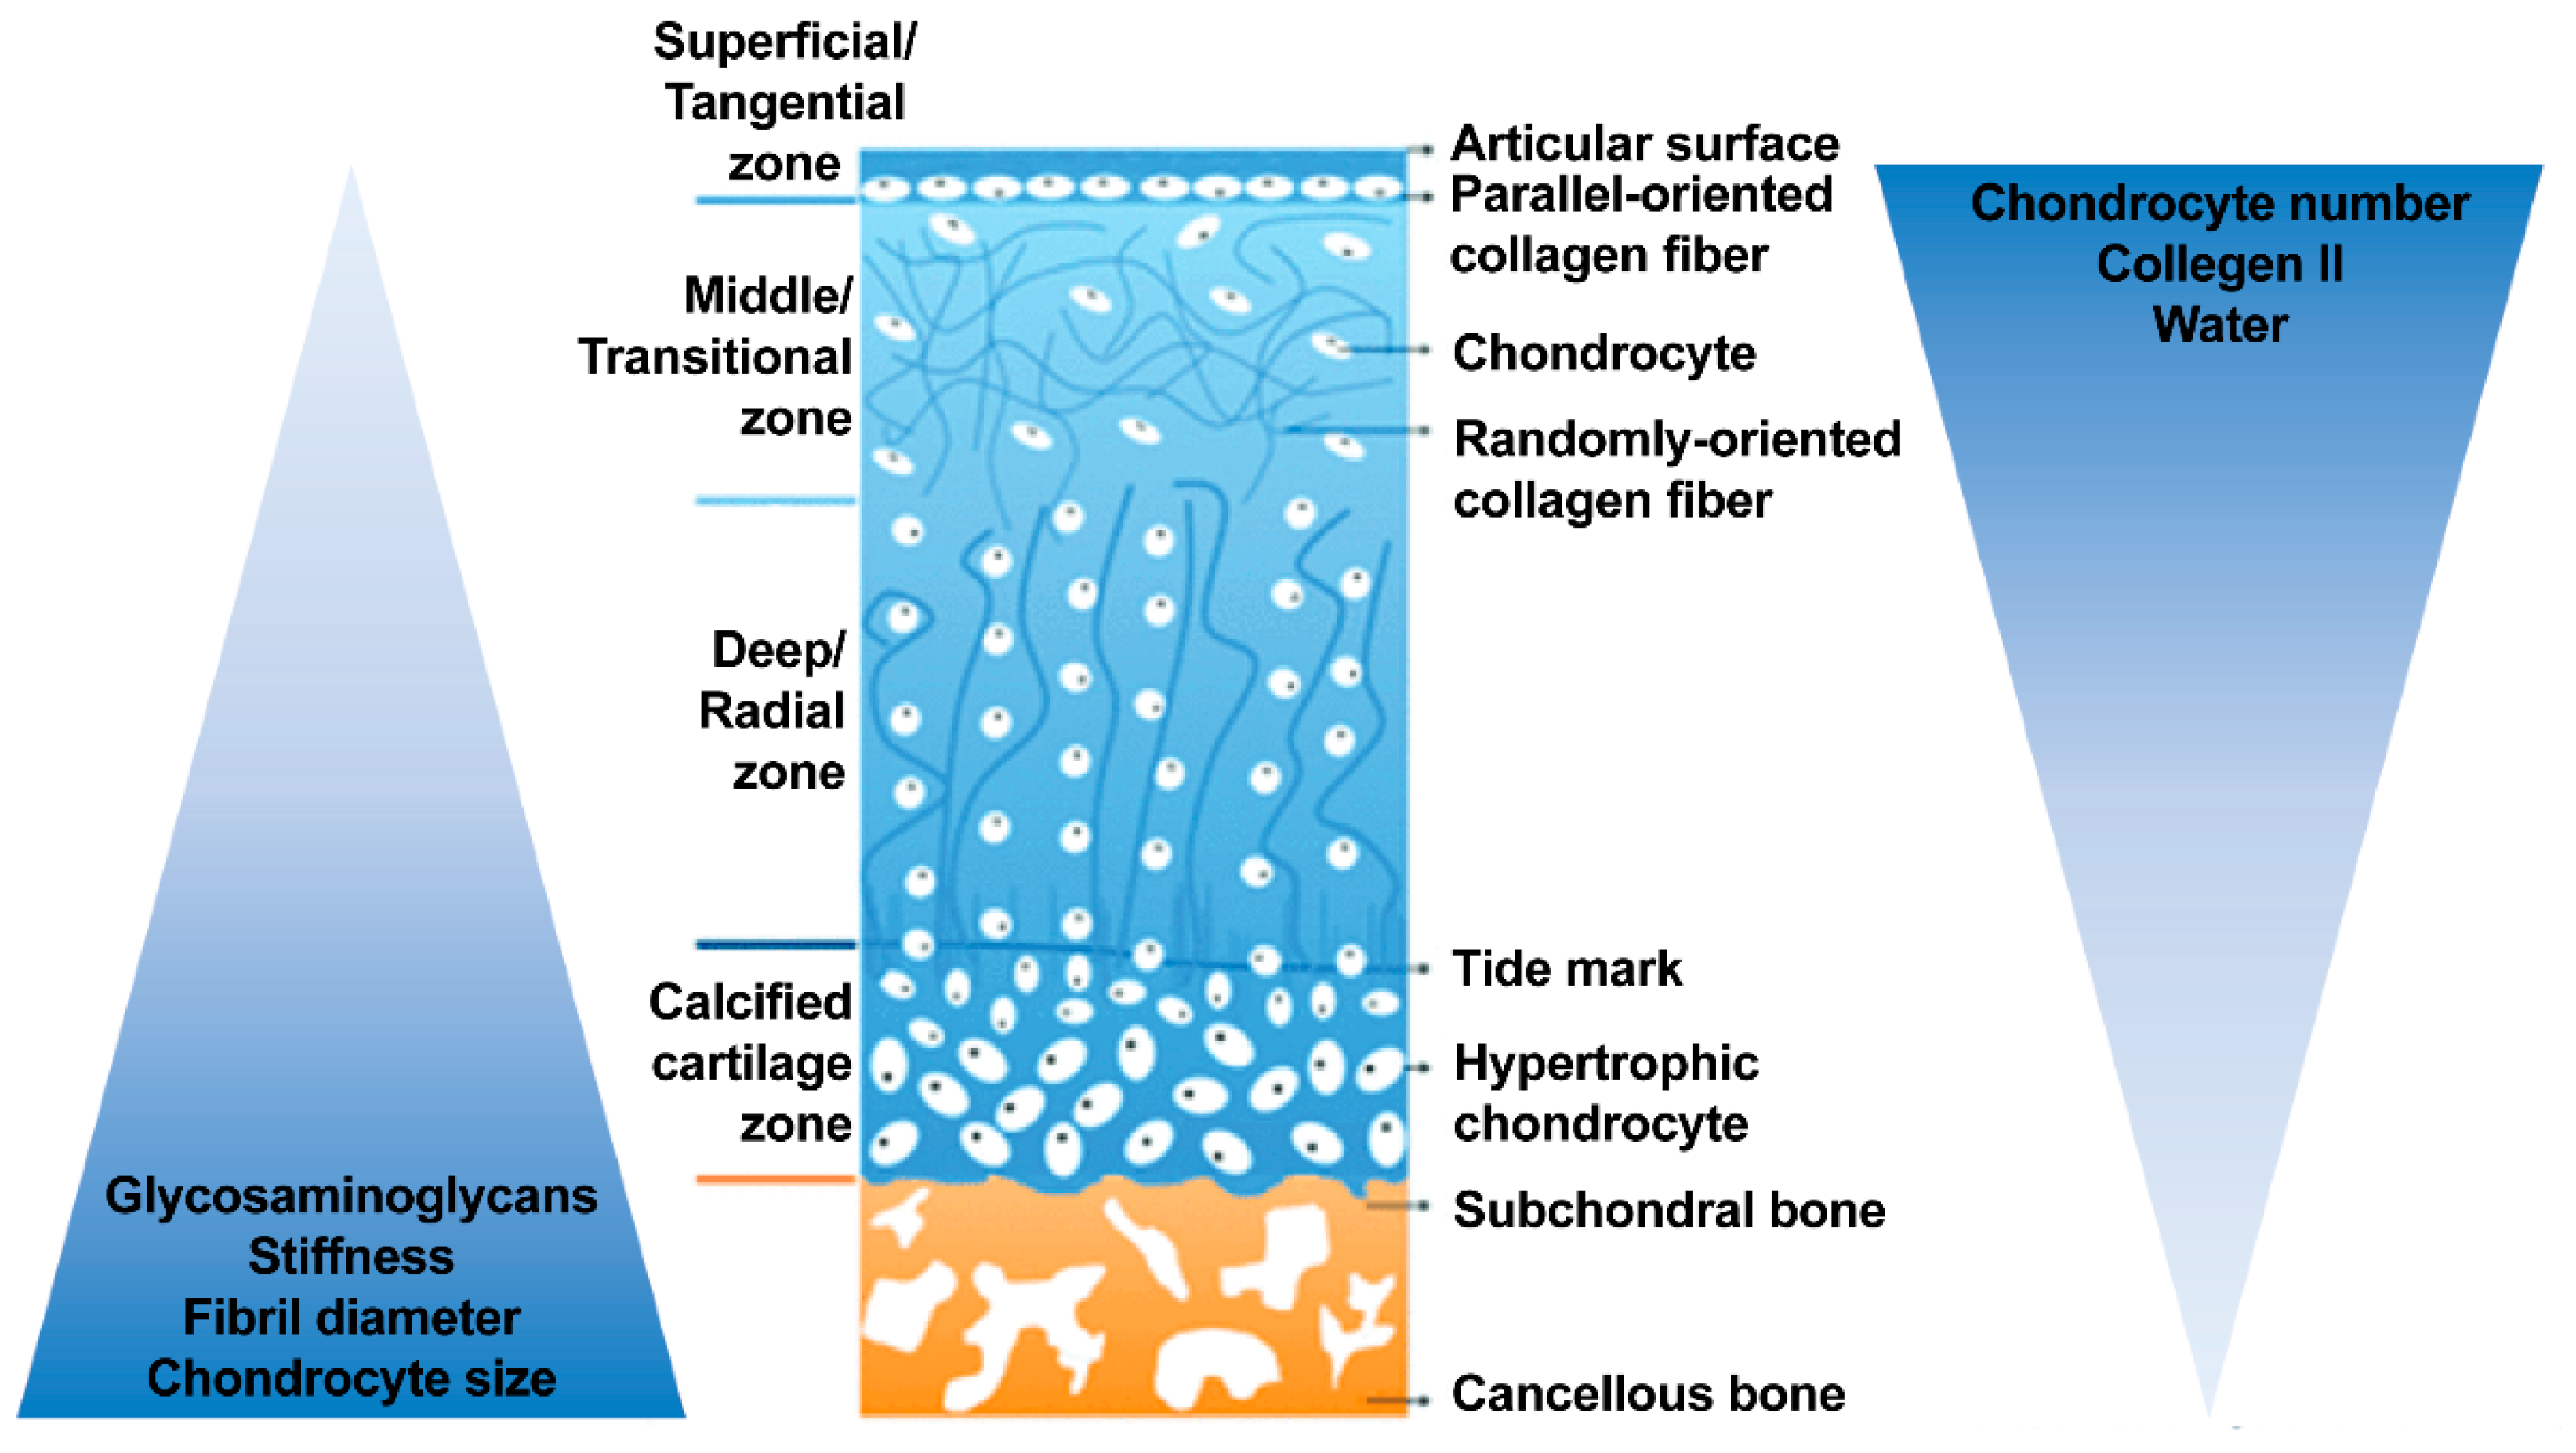 Perspectives on Synthetic Materials to Guide Tissue Regeneration for  Osteochondral Defect Repair